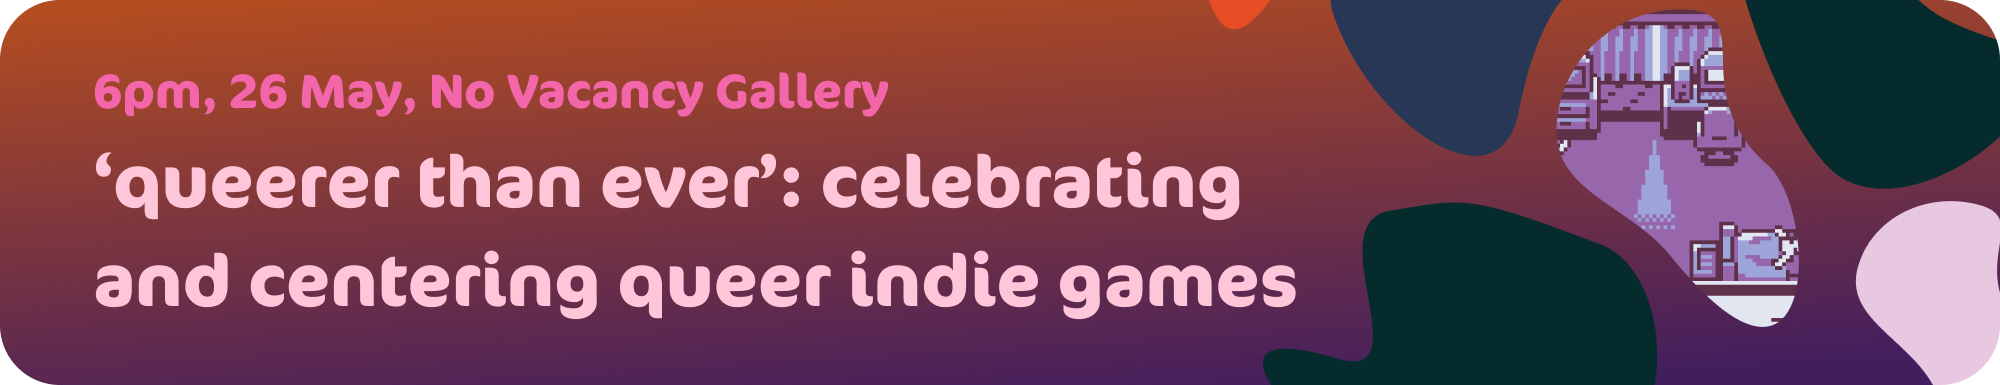 6pm, 26 May, No Vacancy Gallery
'queerer than ever': celebrating and centering queer indie games